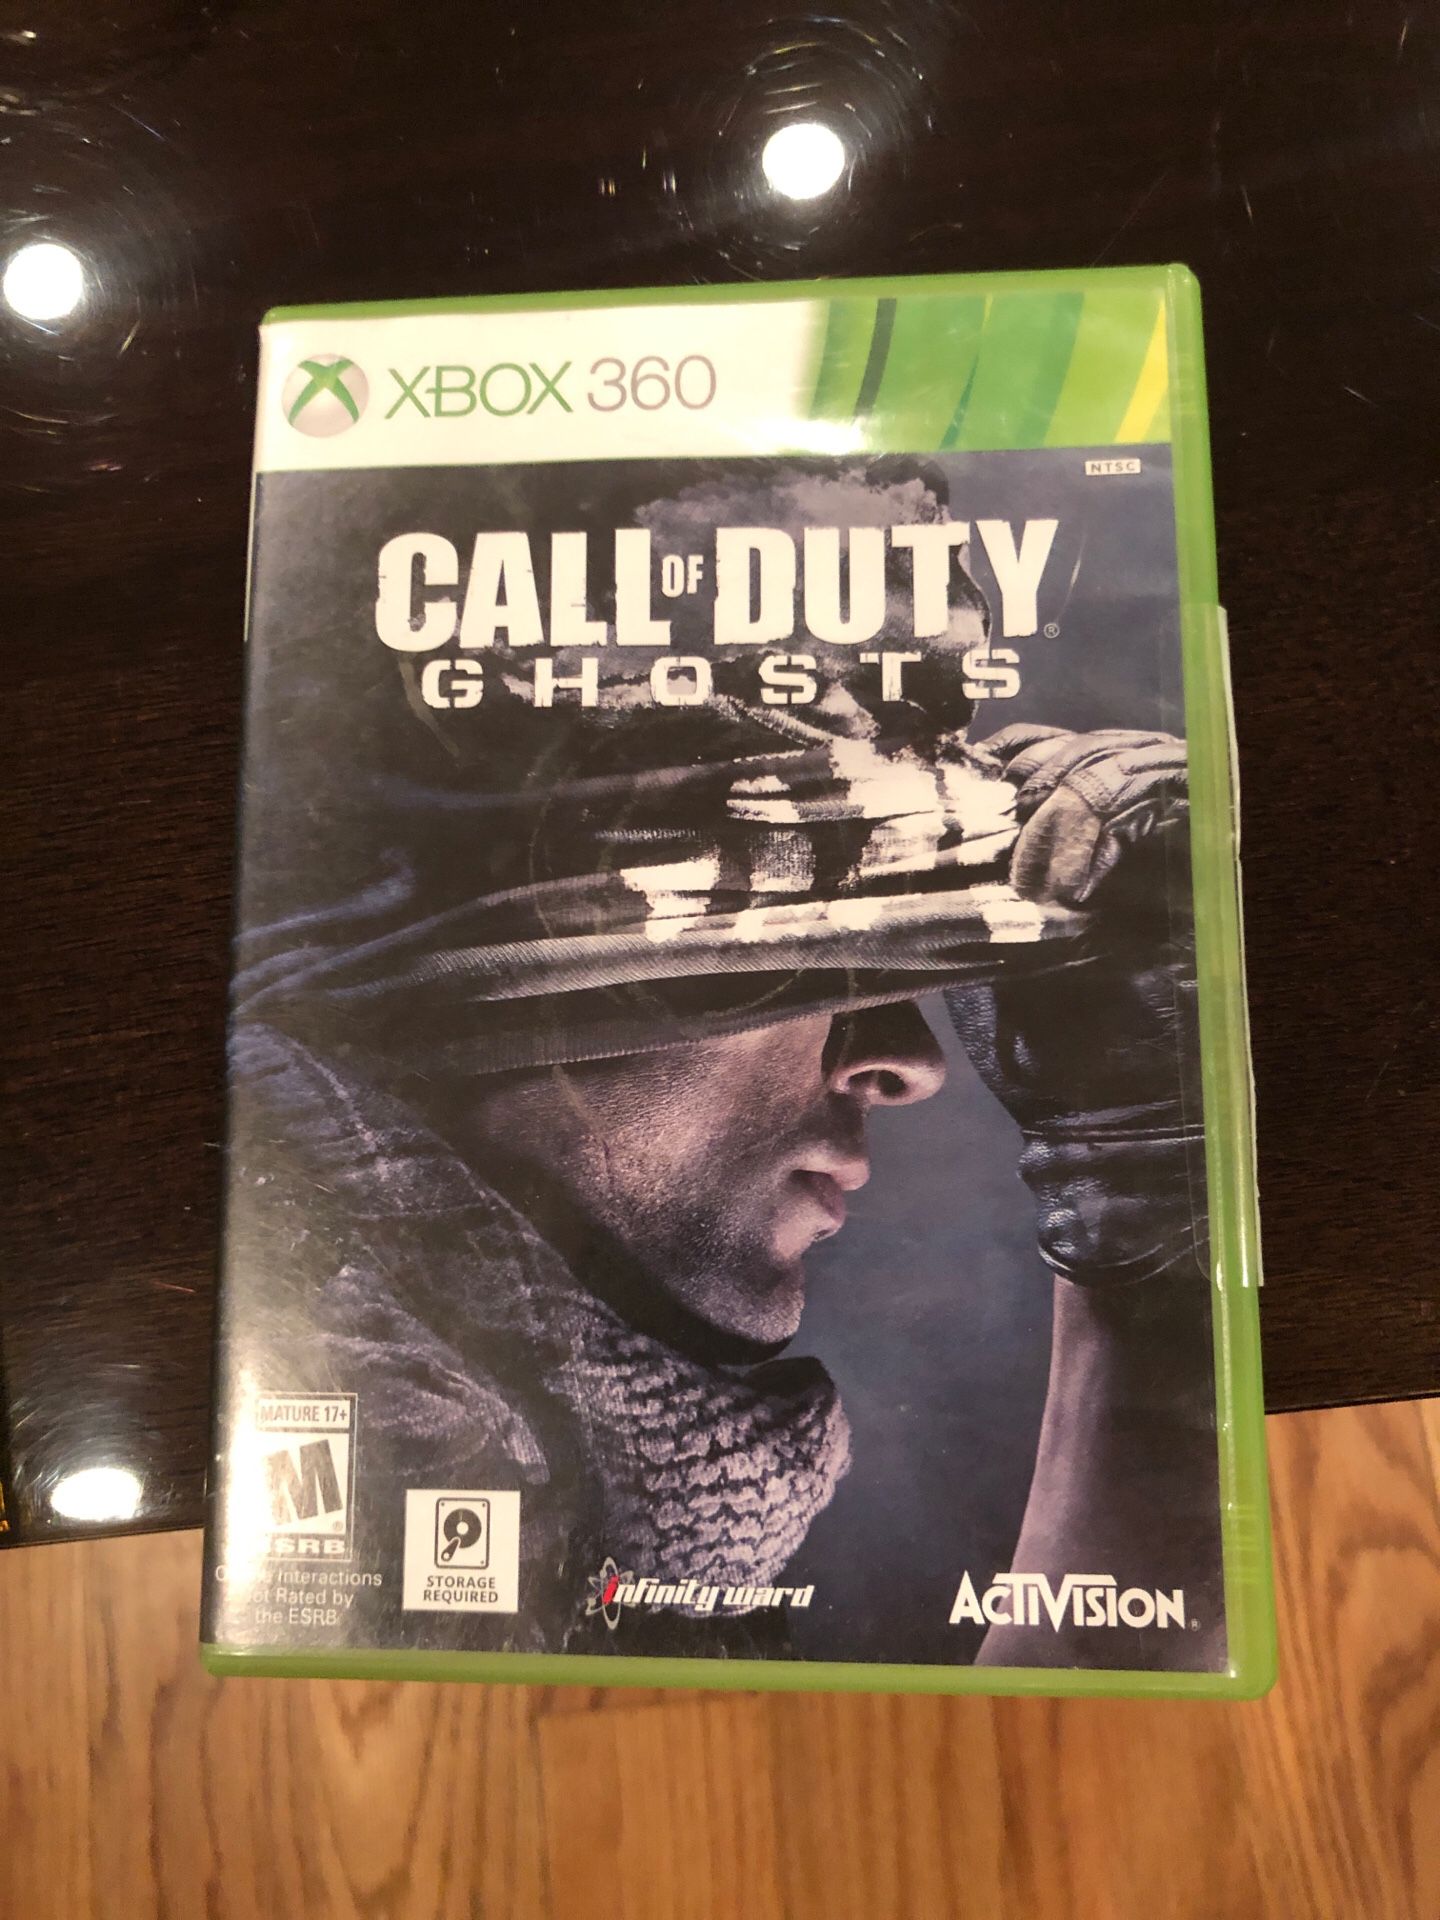 Call of duty ghost Xbox 360 game